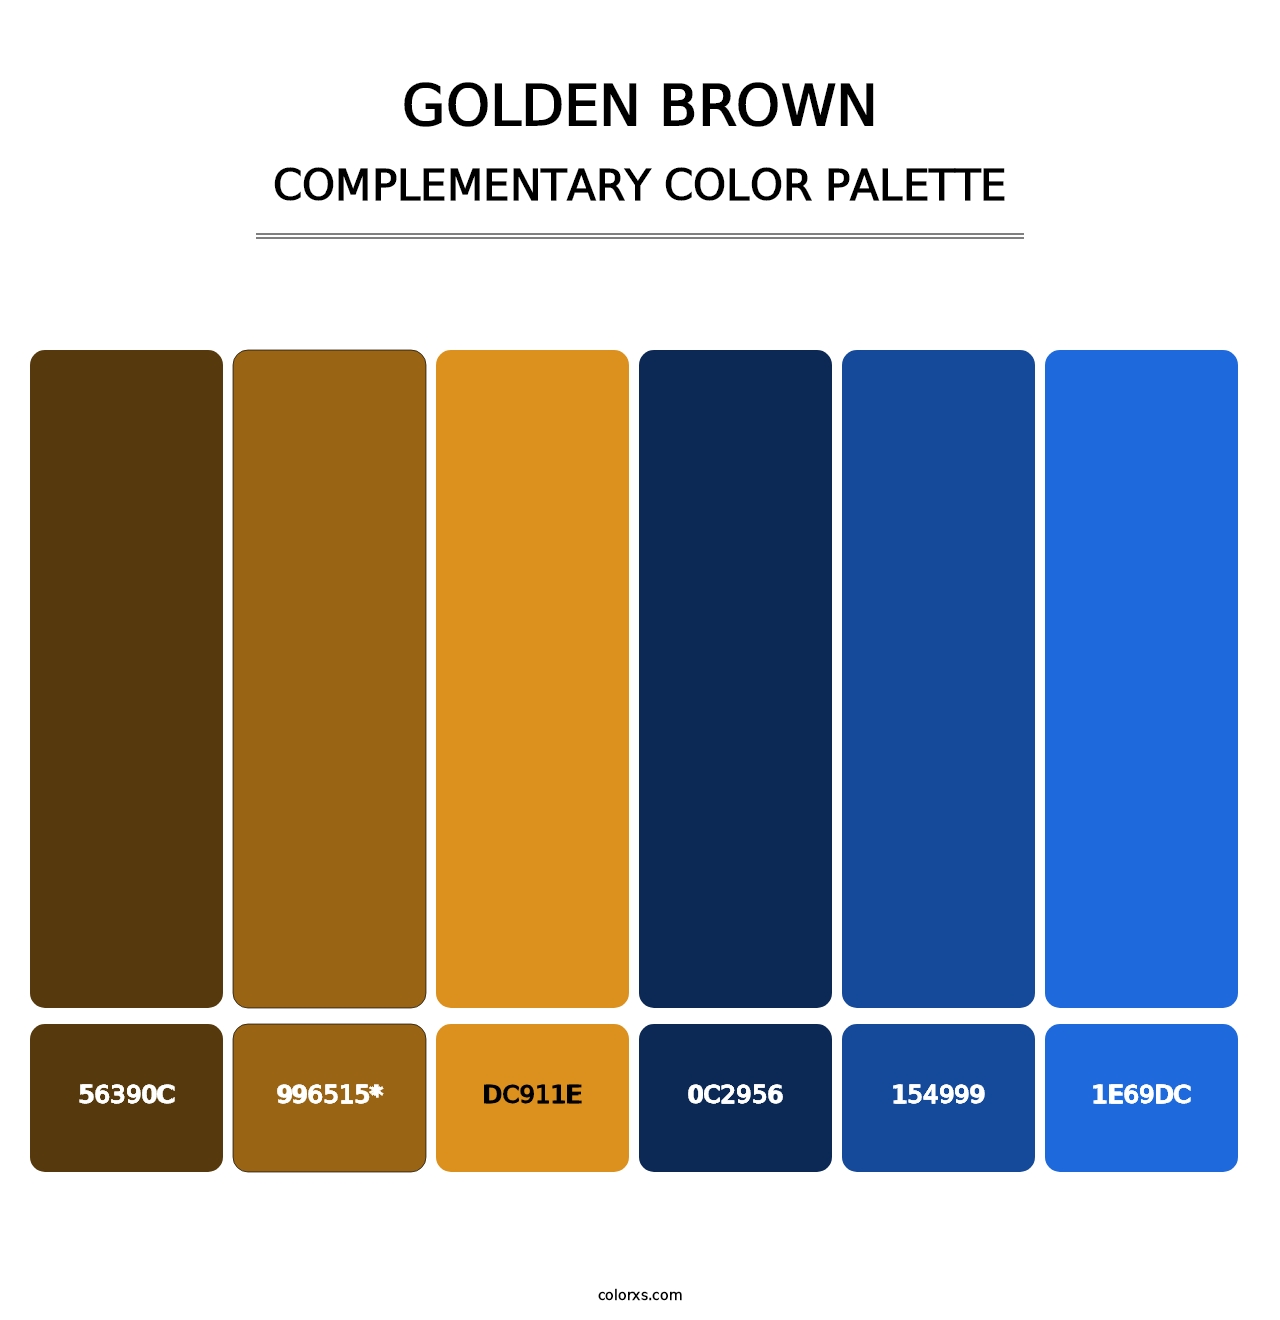 Golden brown - Complementary Color Palette